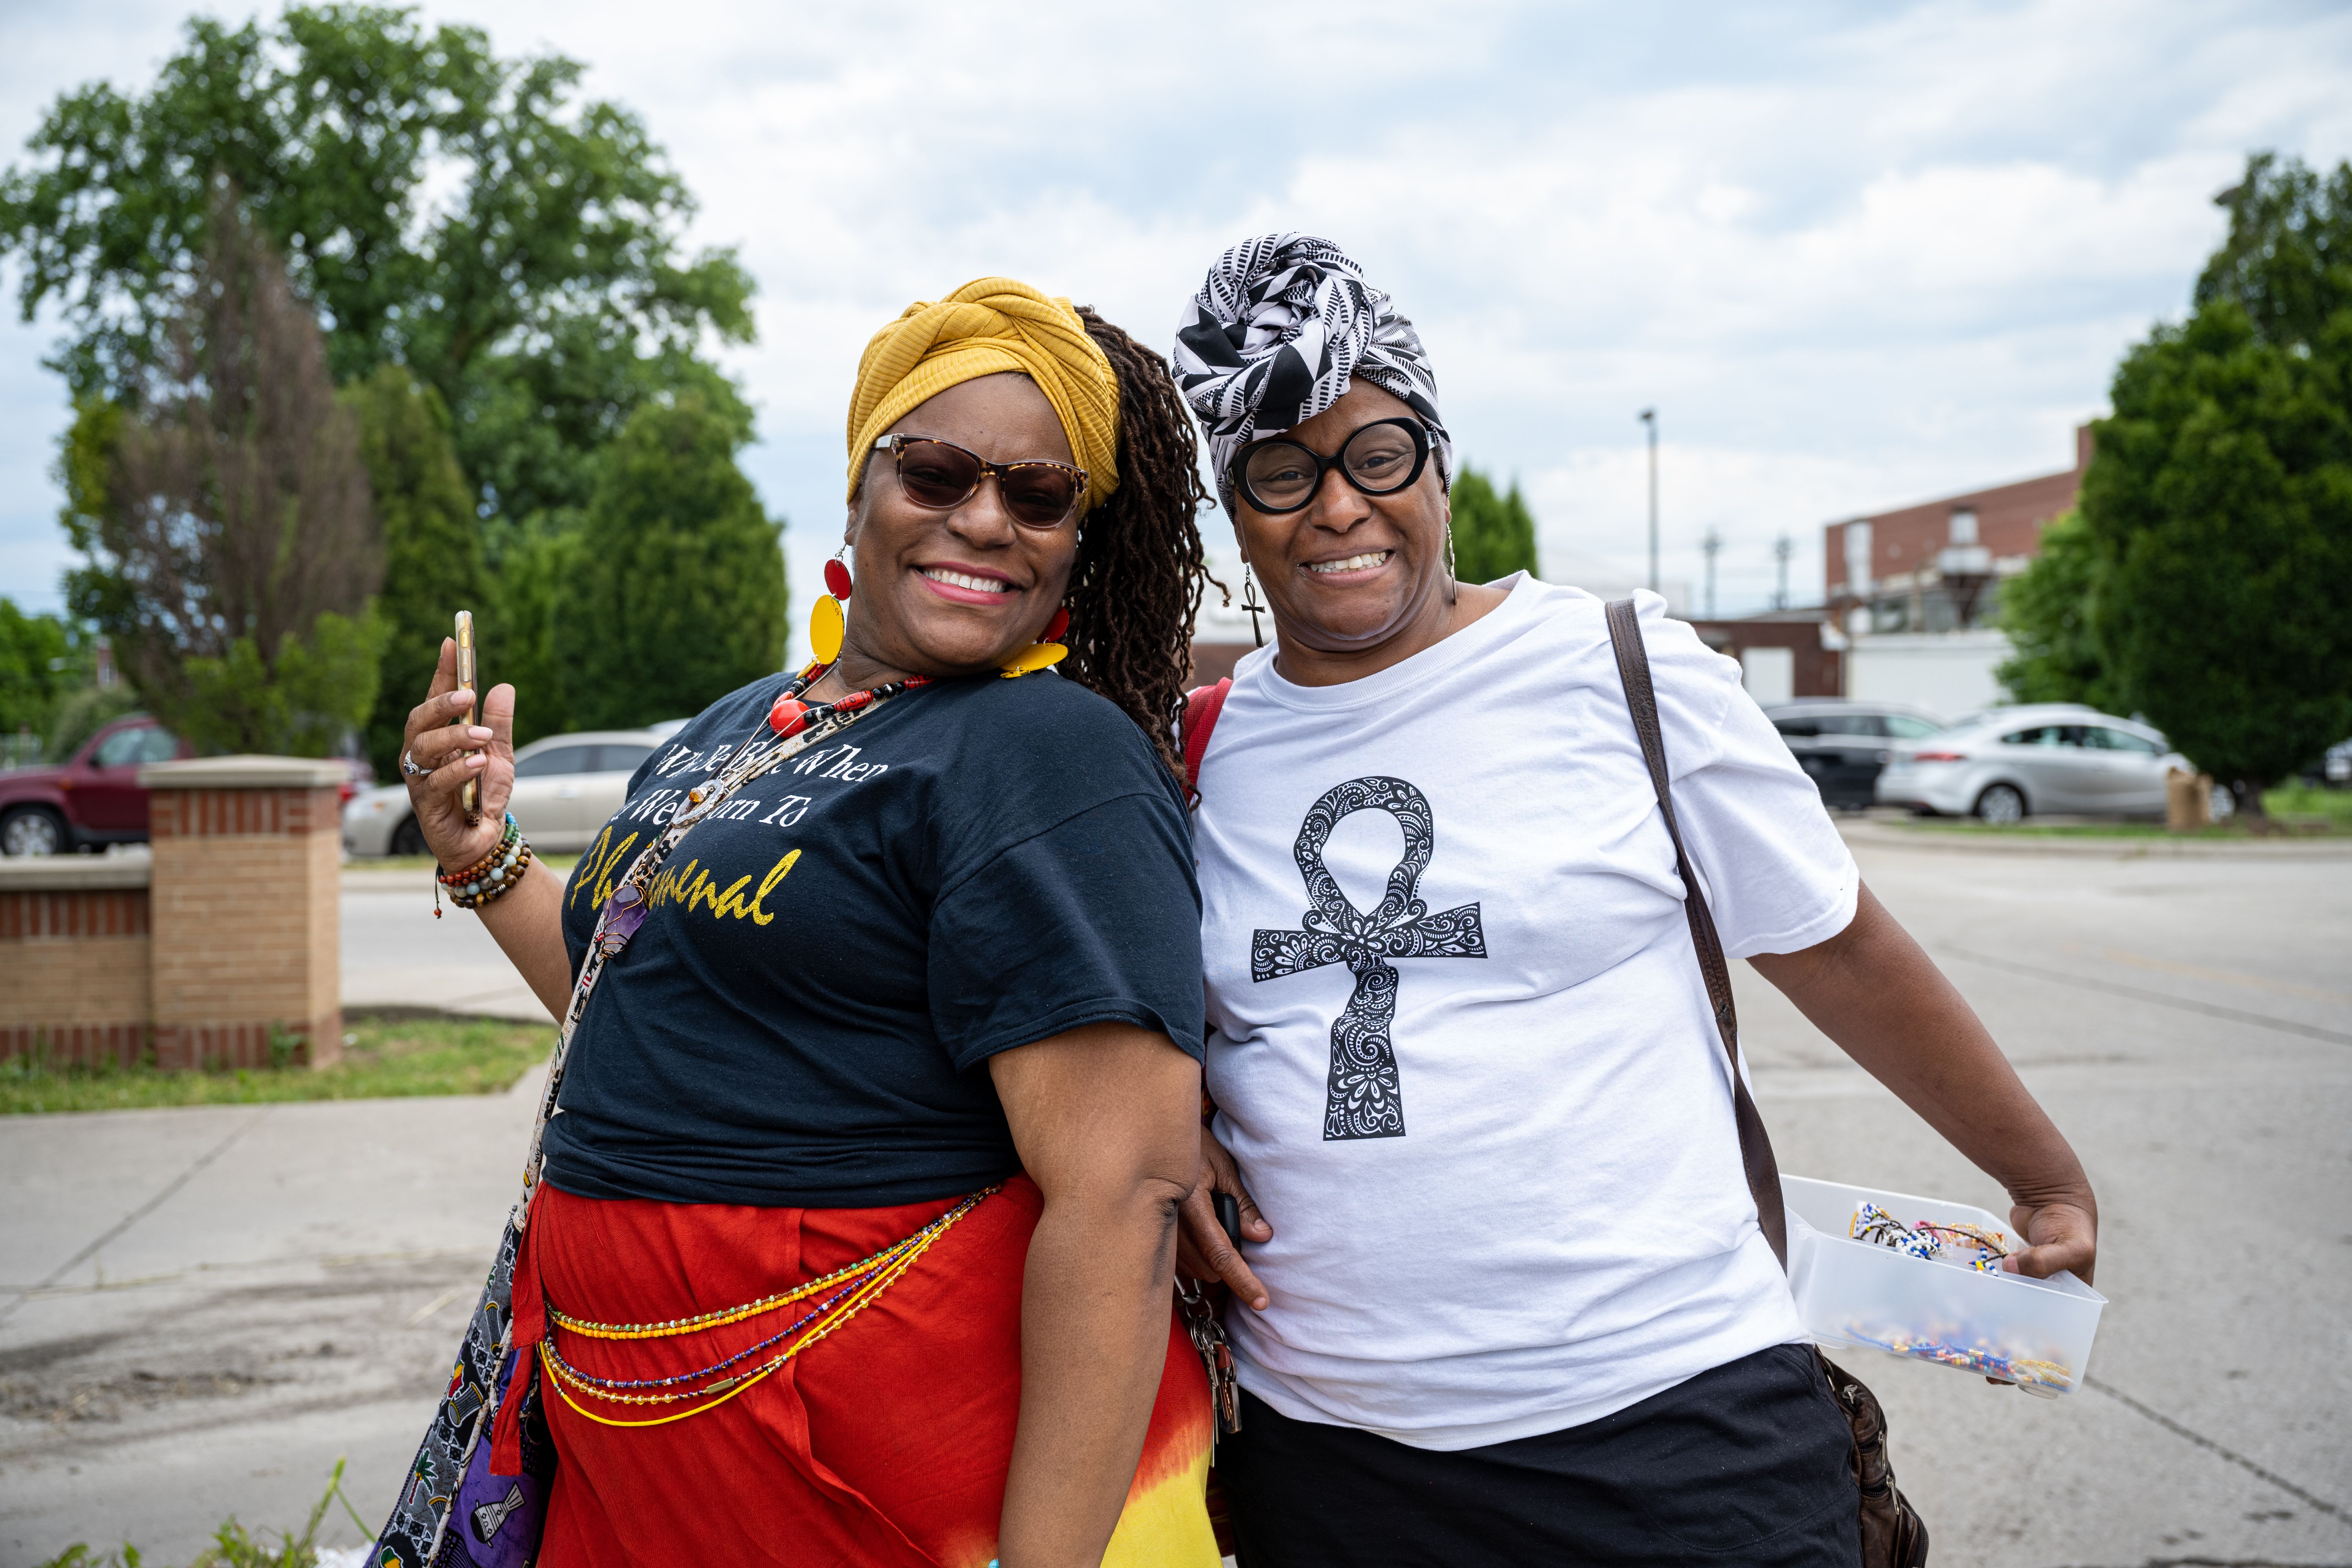 Two women celebrate Juneteenth together